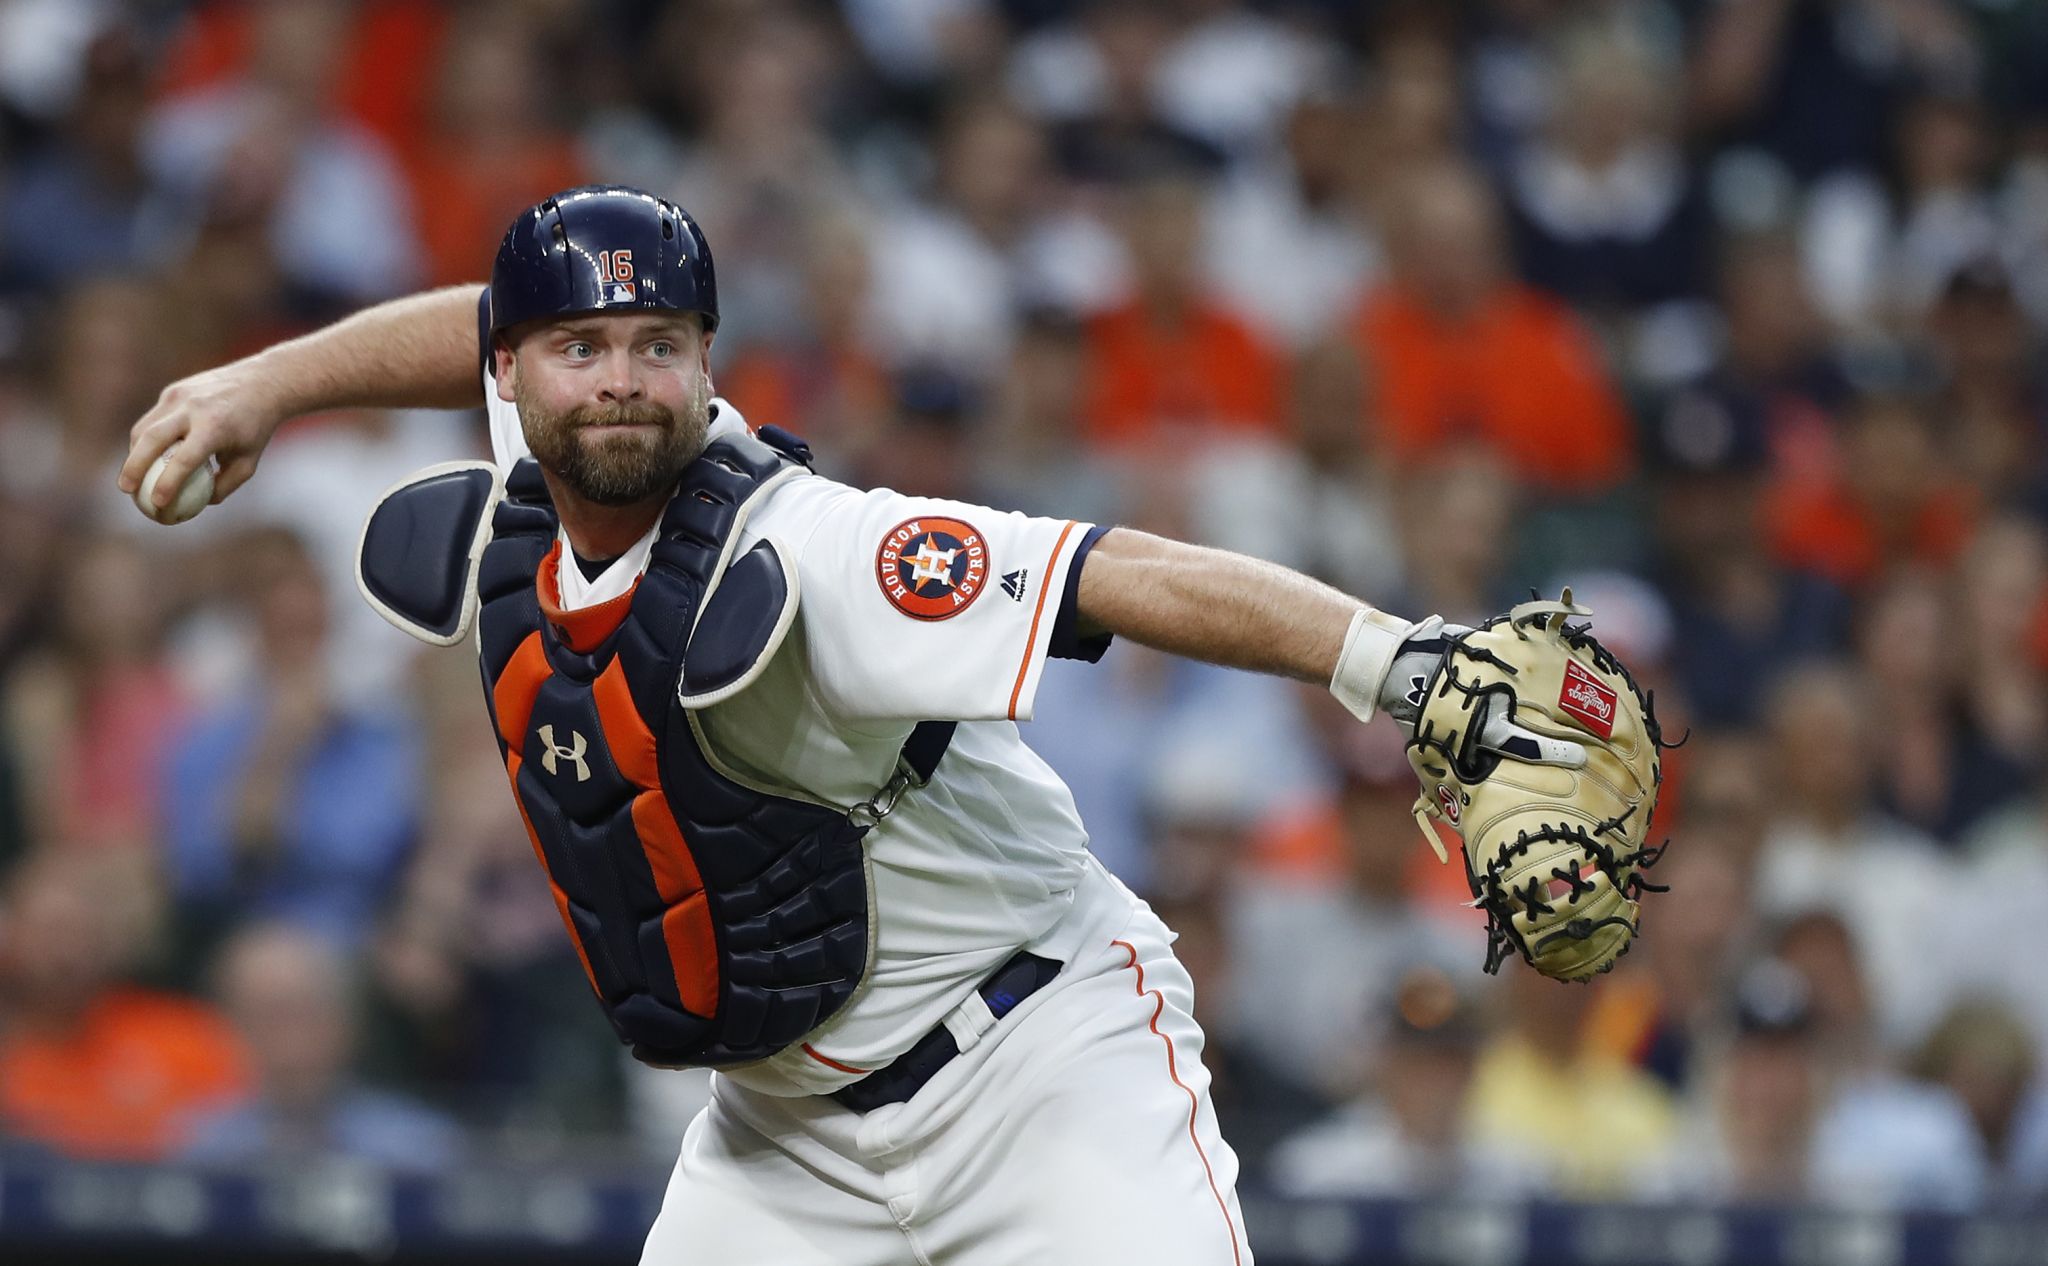 Brian McCann's uncanny ability to get best out of pitchers serves Astros  well